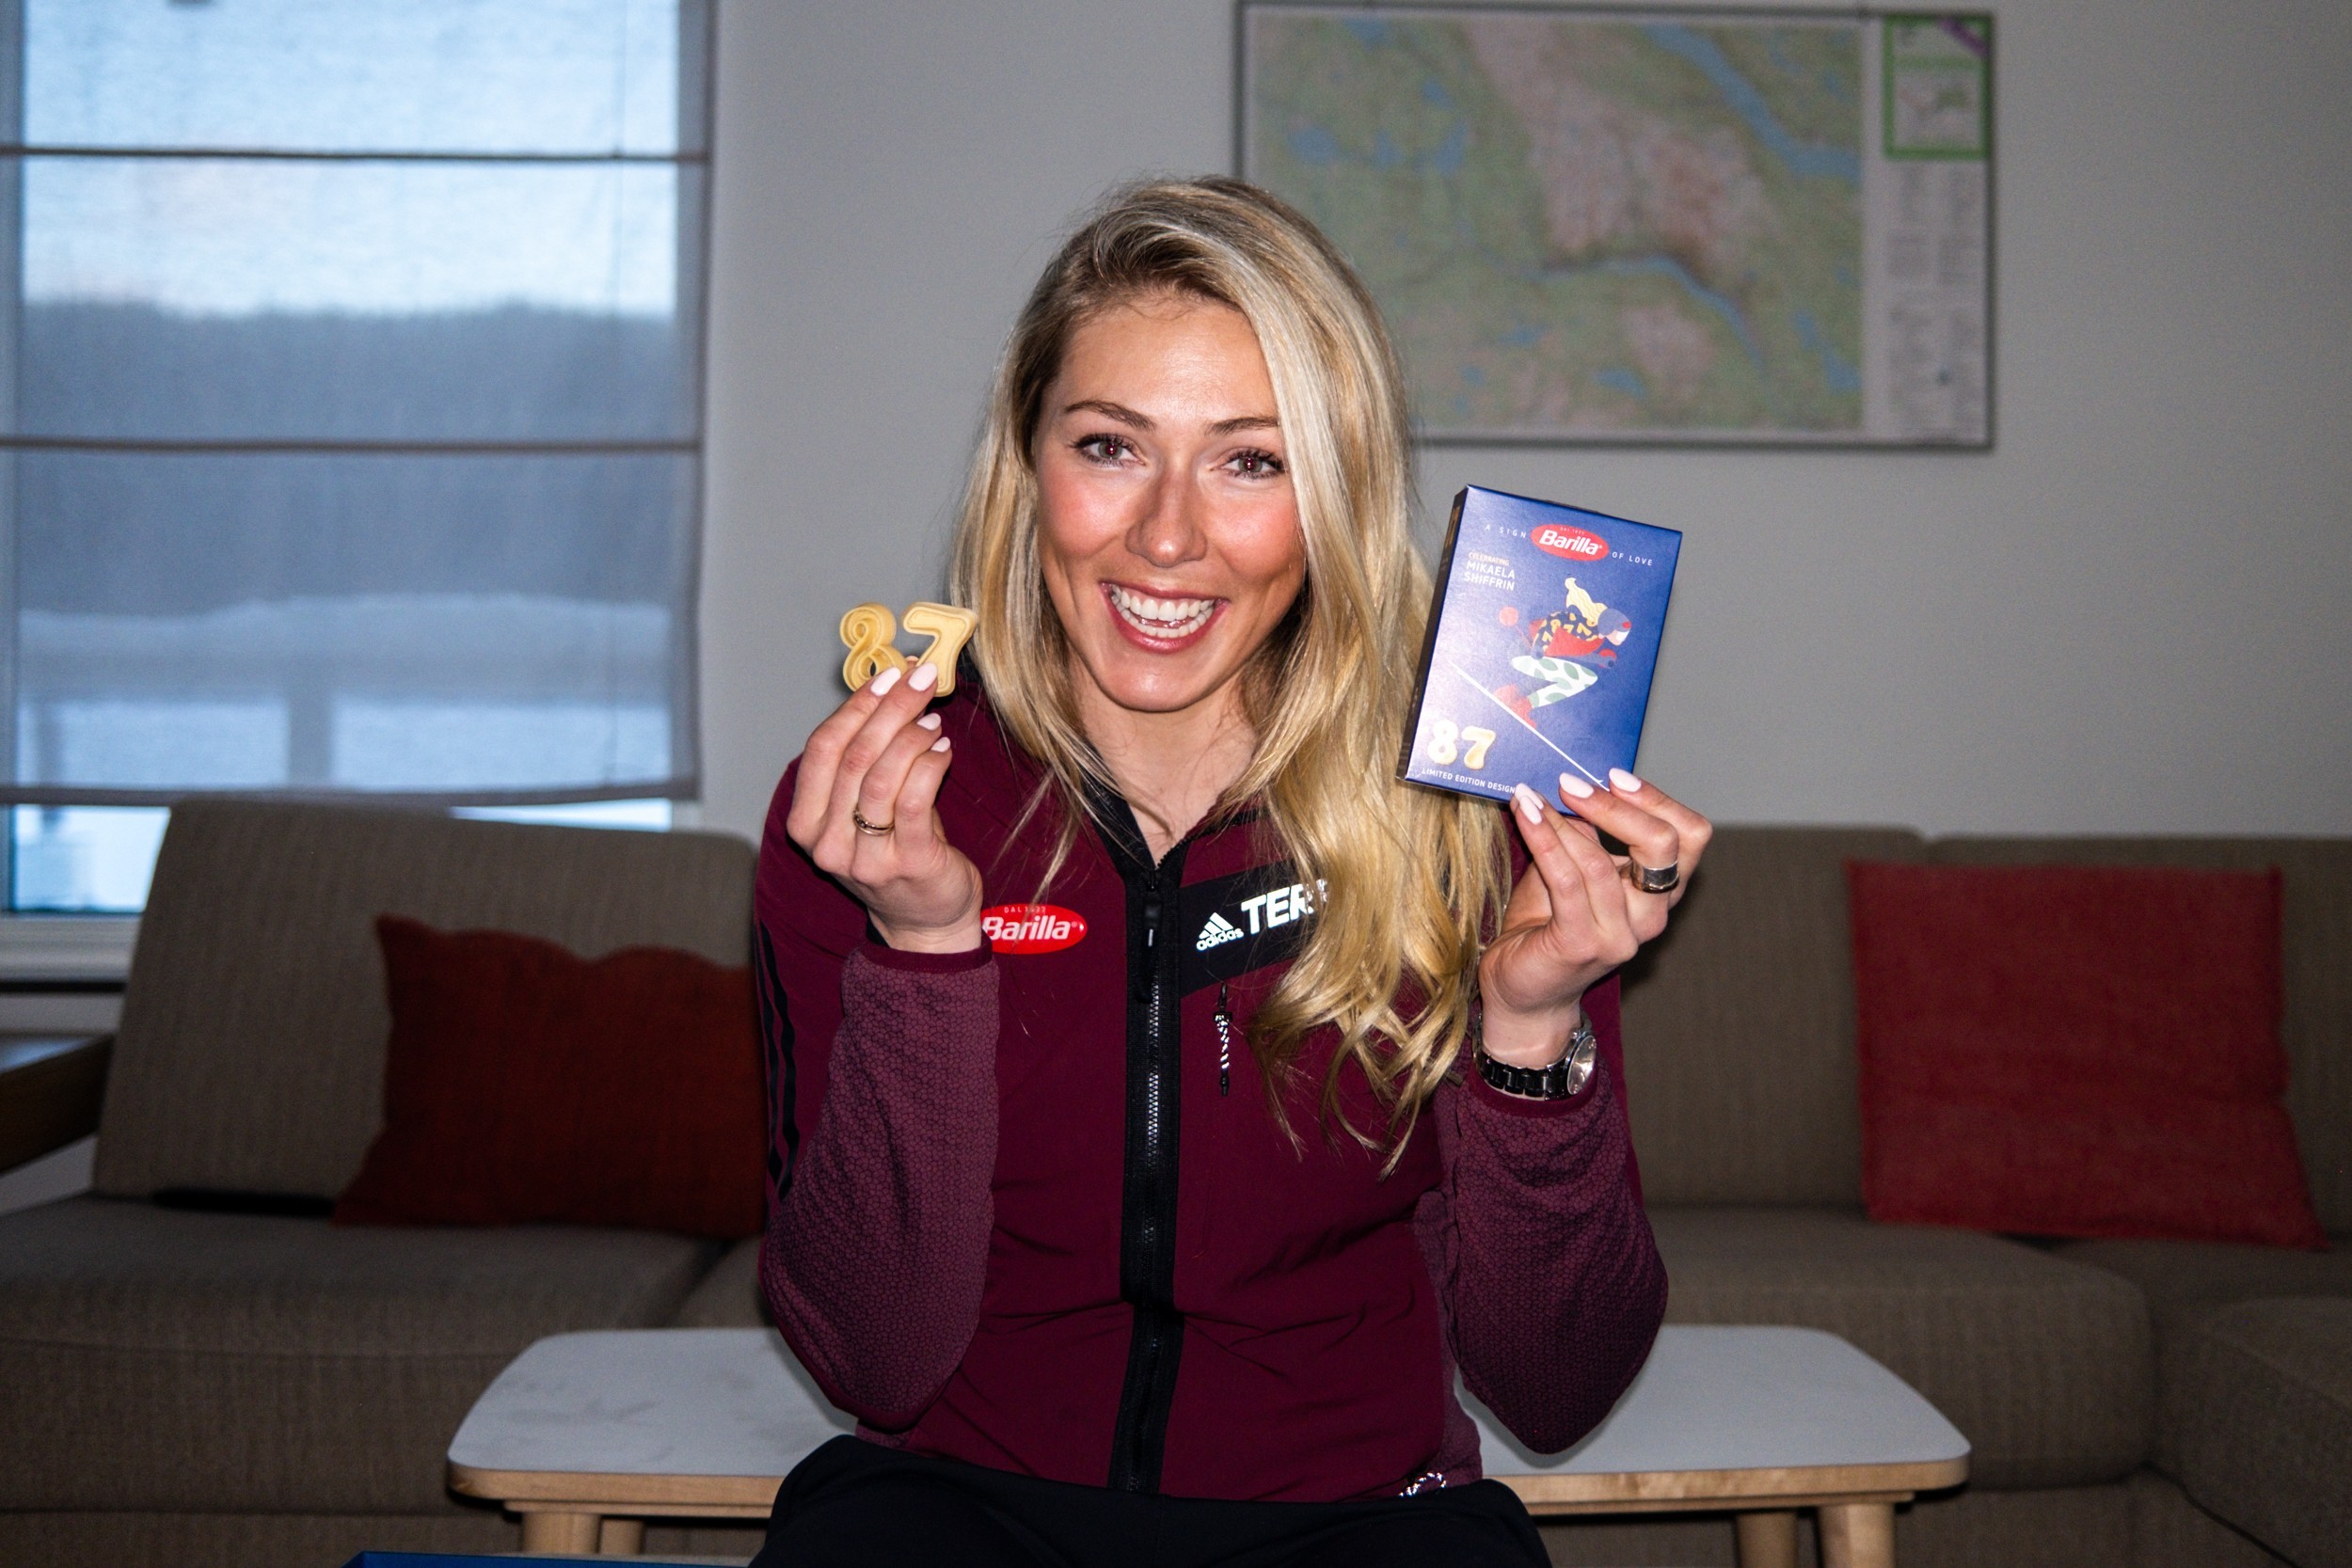 Barilla & Mikaela Shiffrin: Greatness starts with a great recipe - Pack No. 84